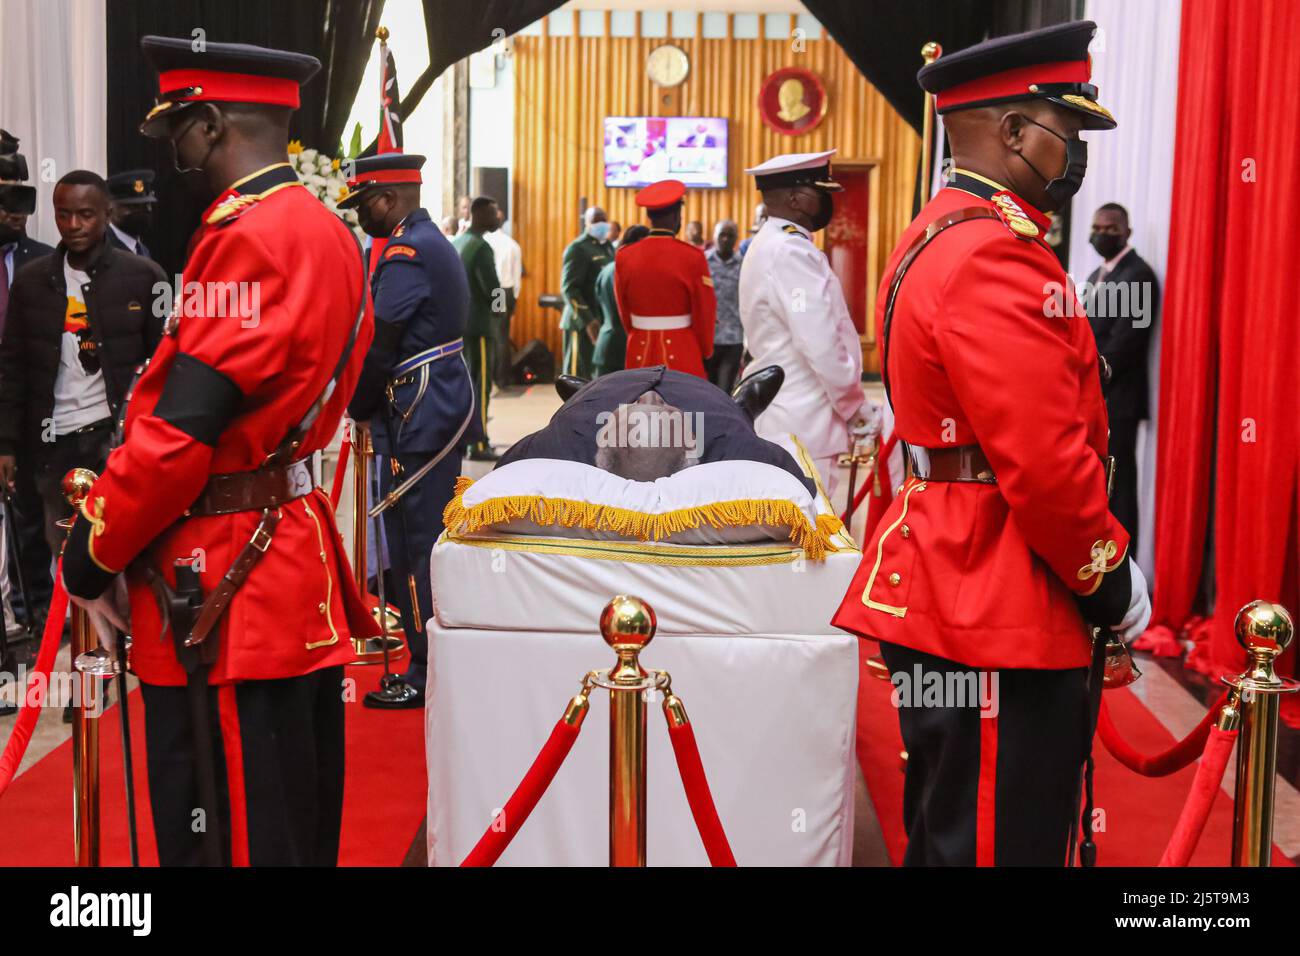 Nairobi, Kenya. 25th Apr, 2022. (Editors note image depicts death) The body of the late former president Mwai Kibaki at the parliament building. Kenyans got an opportunity to view and give last respect to the body of former Kenya president the late Mwai Kibaki which is lying at the Kenyan parliament. The former president passed away on 22 April 2022 at the age of 90. Credit: SOPA Images Limited/Alamy Live News Stock Photo